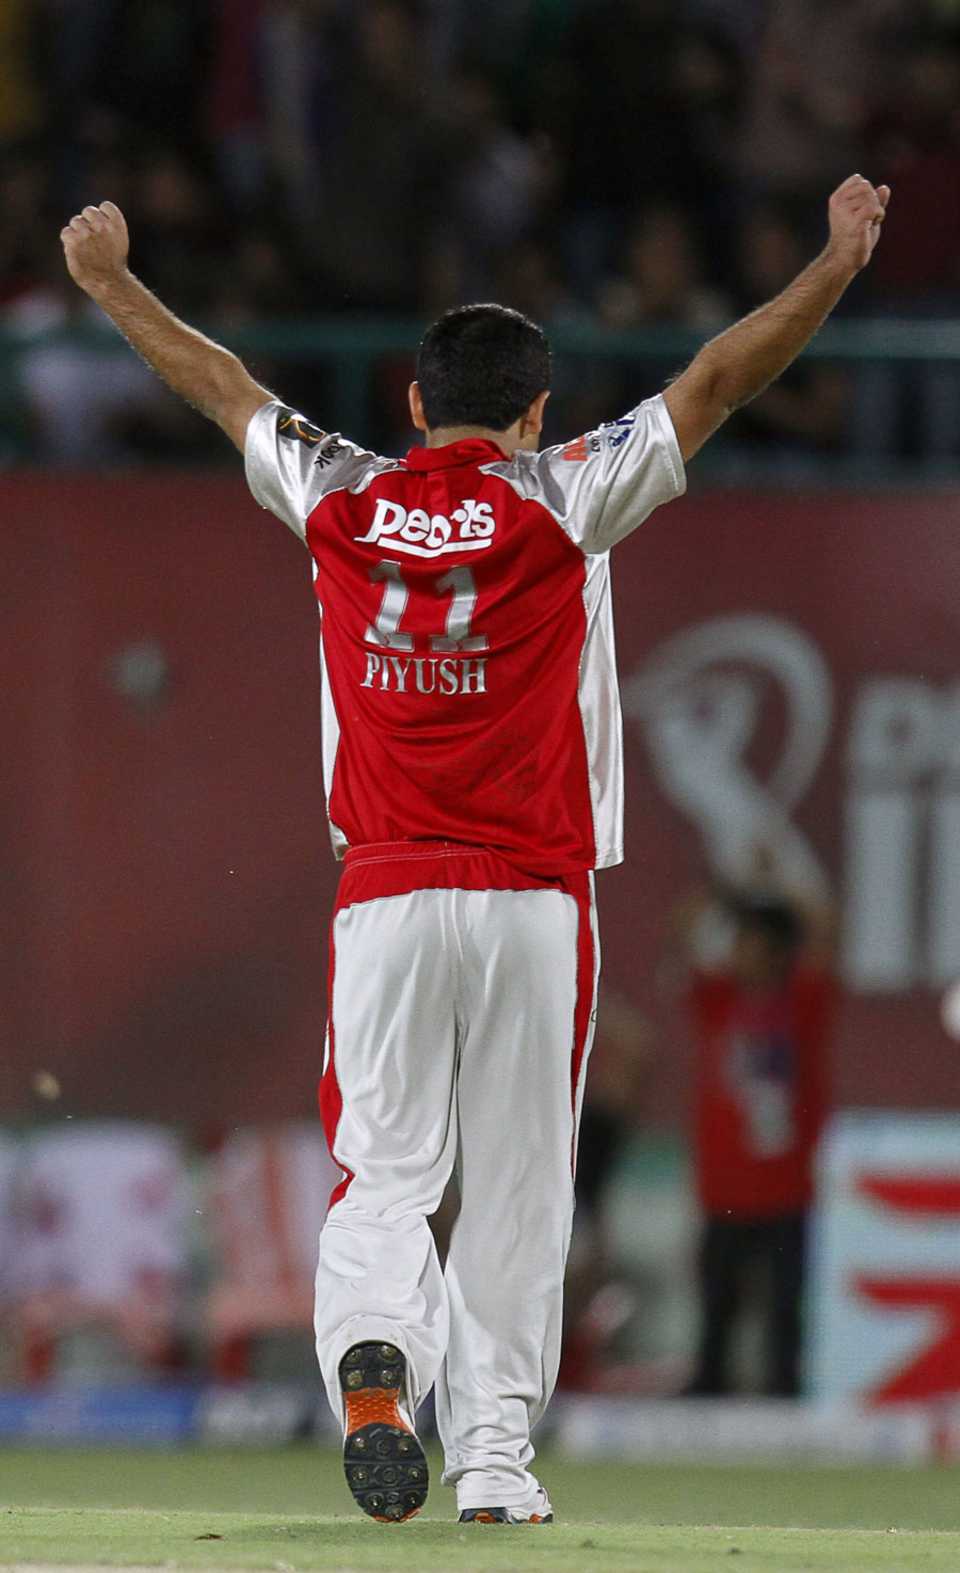 Piyush Chawla finished with 4 for 17